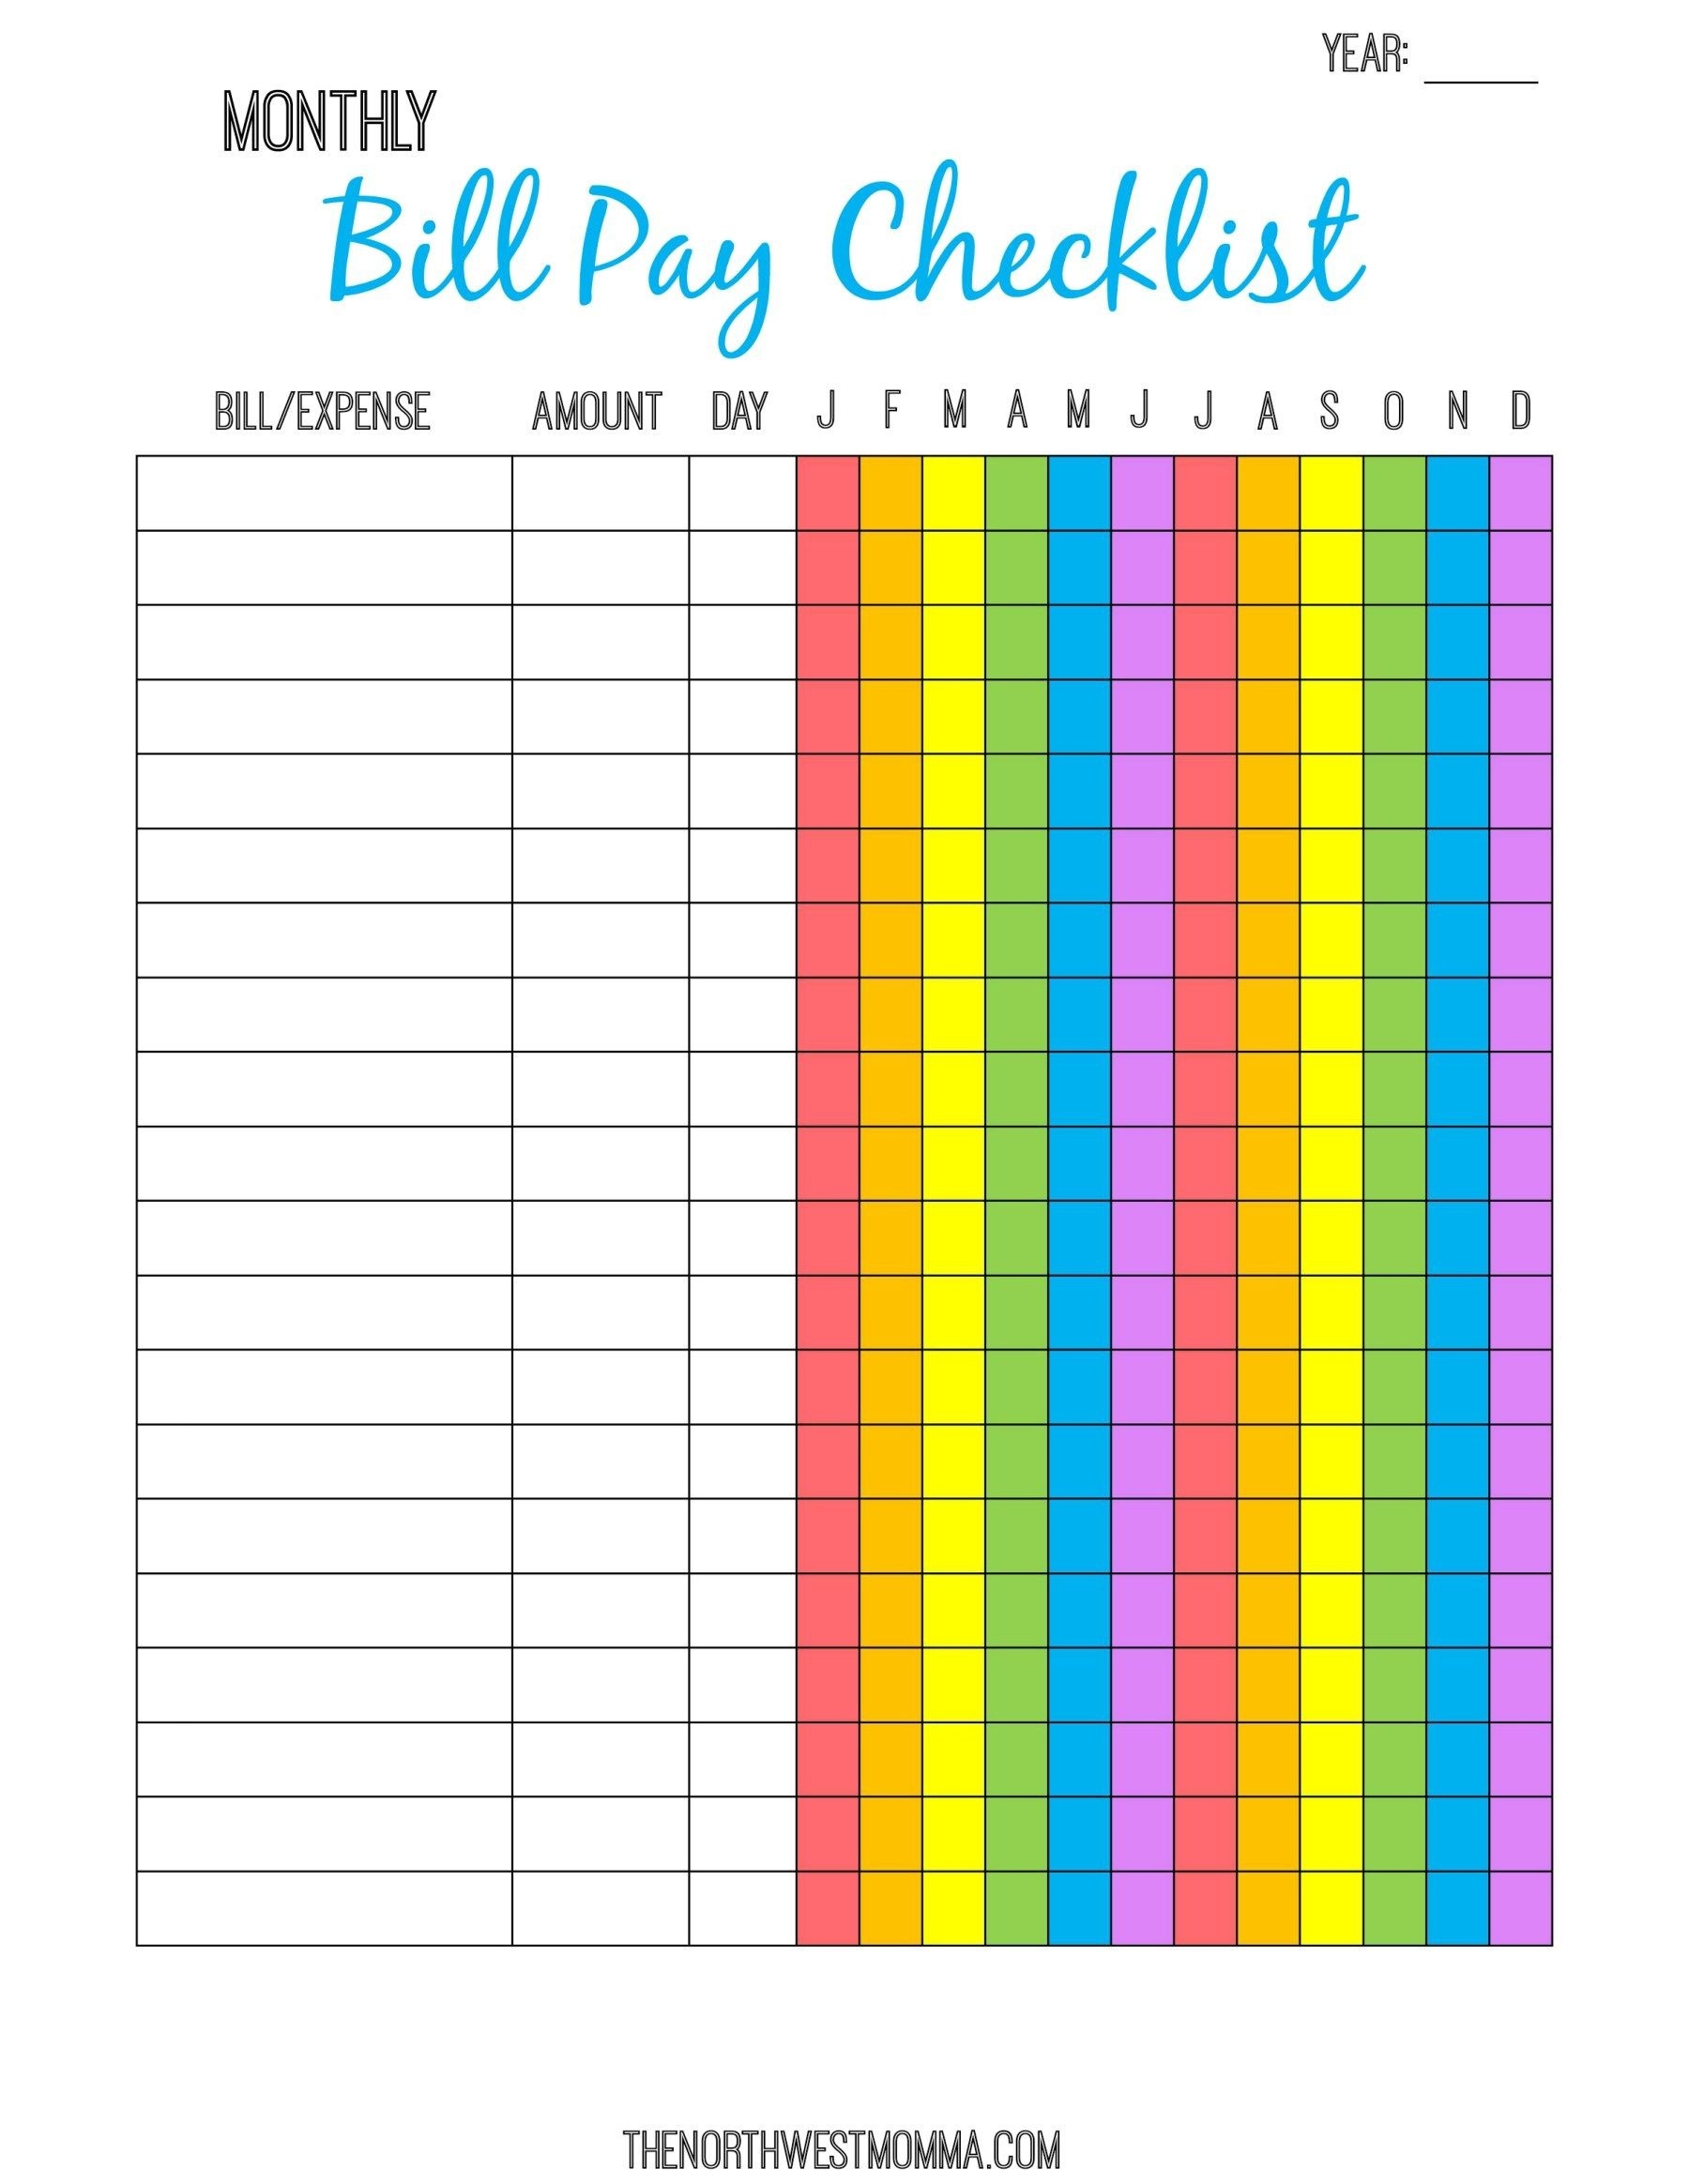 Monthly Bill Pay Checklist- Free Printable! | $ Saving Money-Bill Pay Printable Checklist Templates Clender